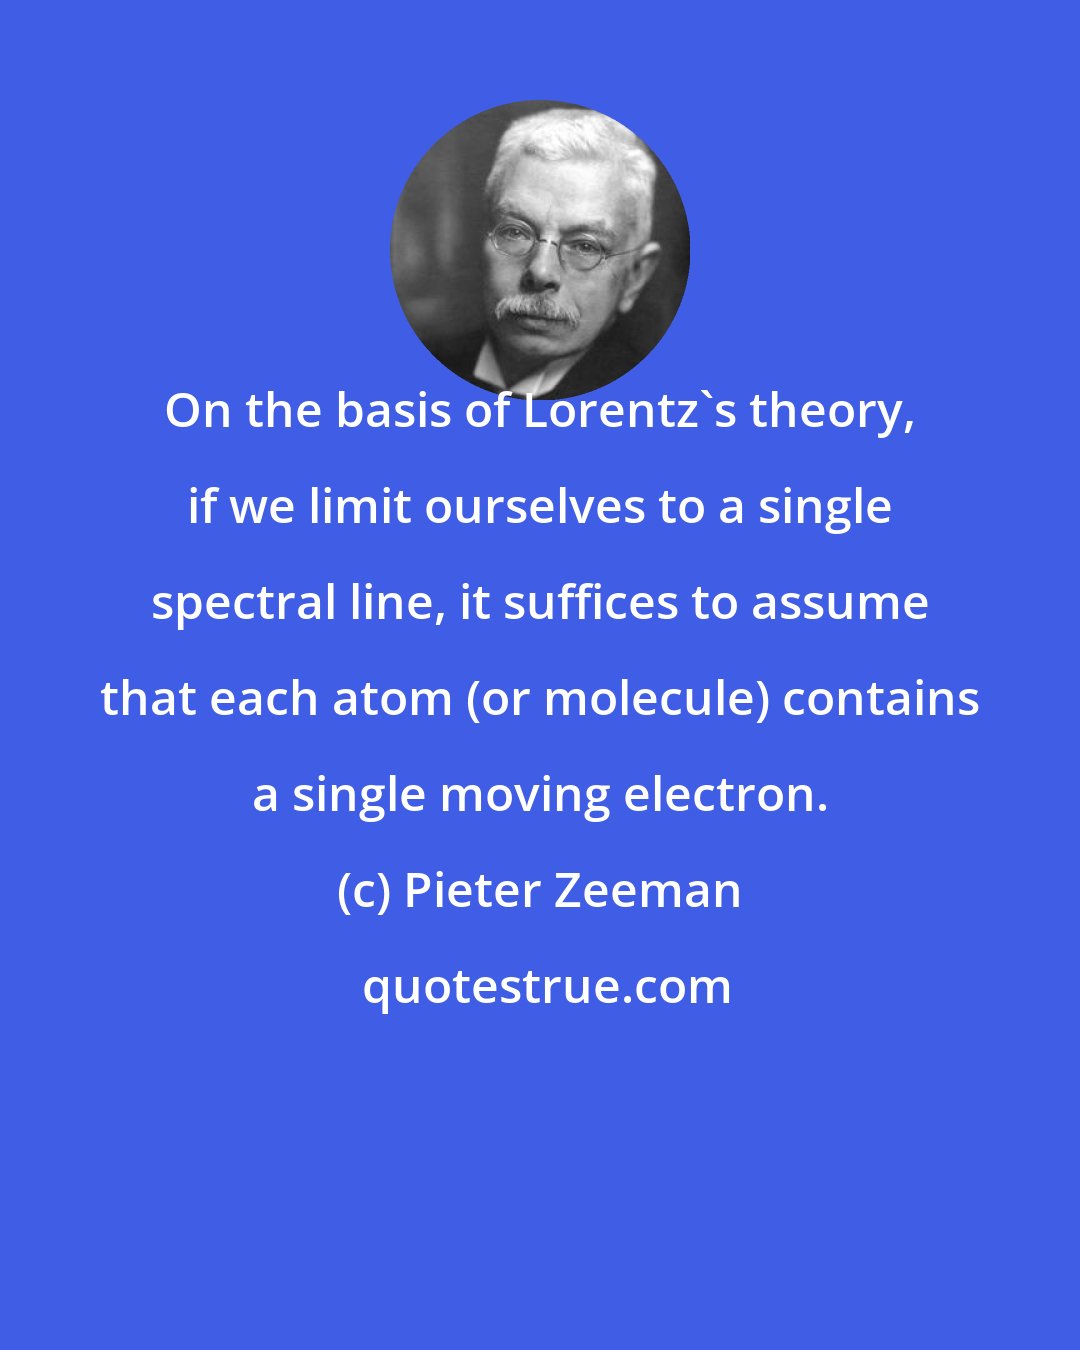 Pieter Zeeman: On the basis of Lorentz's theory, if we limit ourselves to a single spectral line, it suffices to assume that each atom (or molecule) contains a single moving electron.